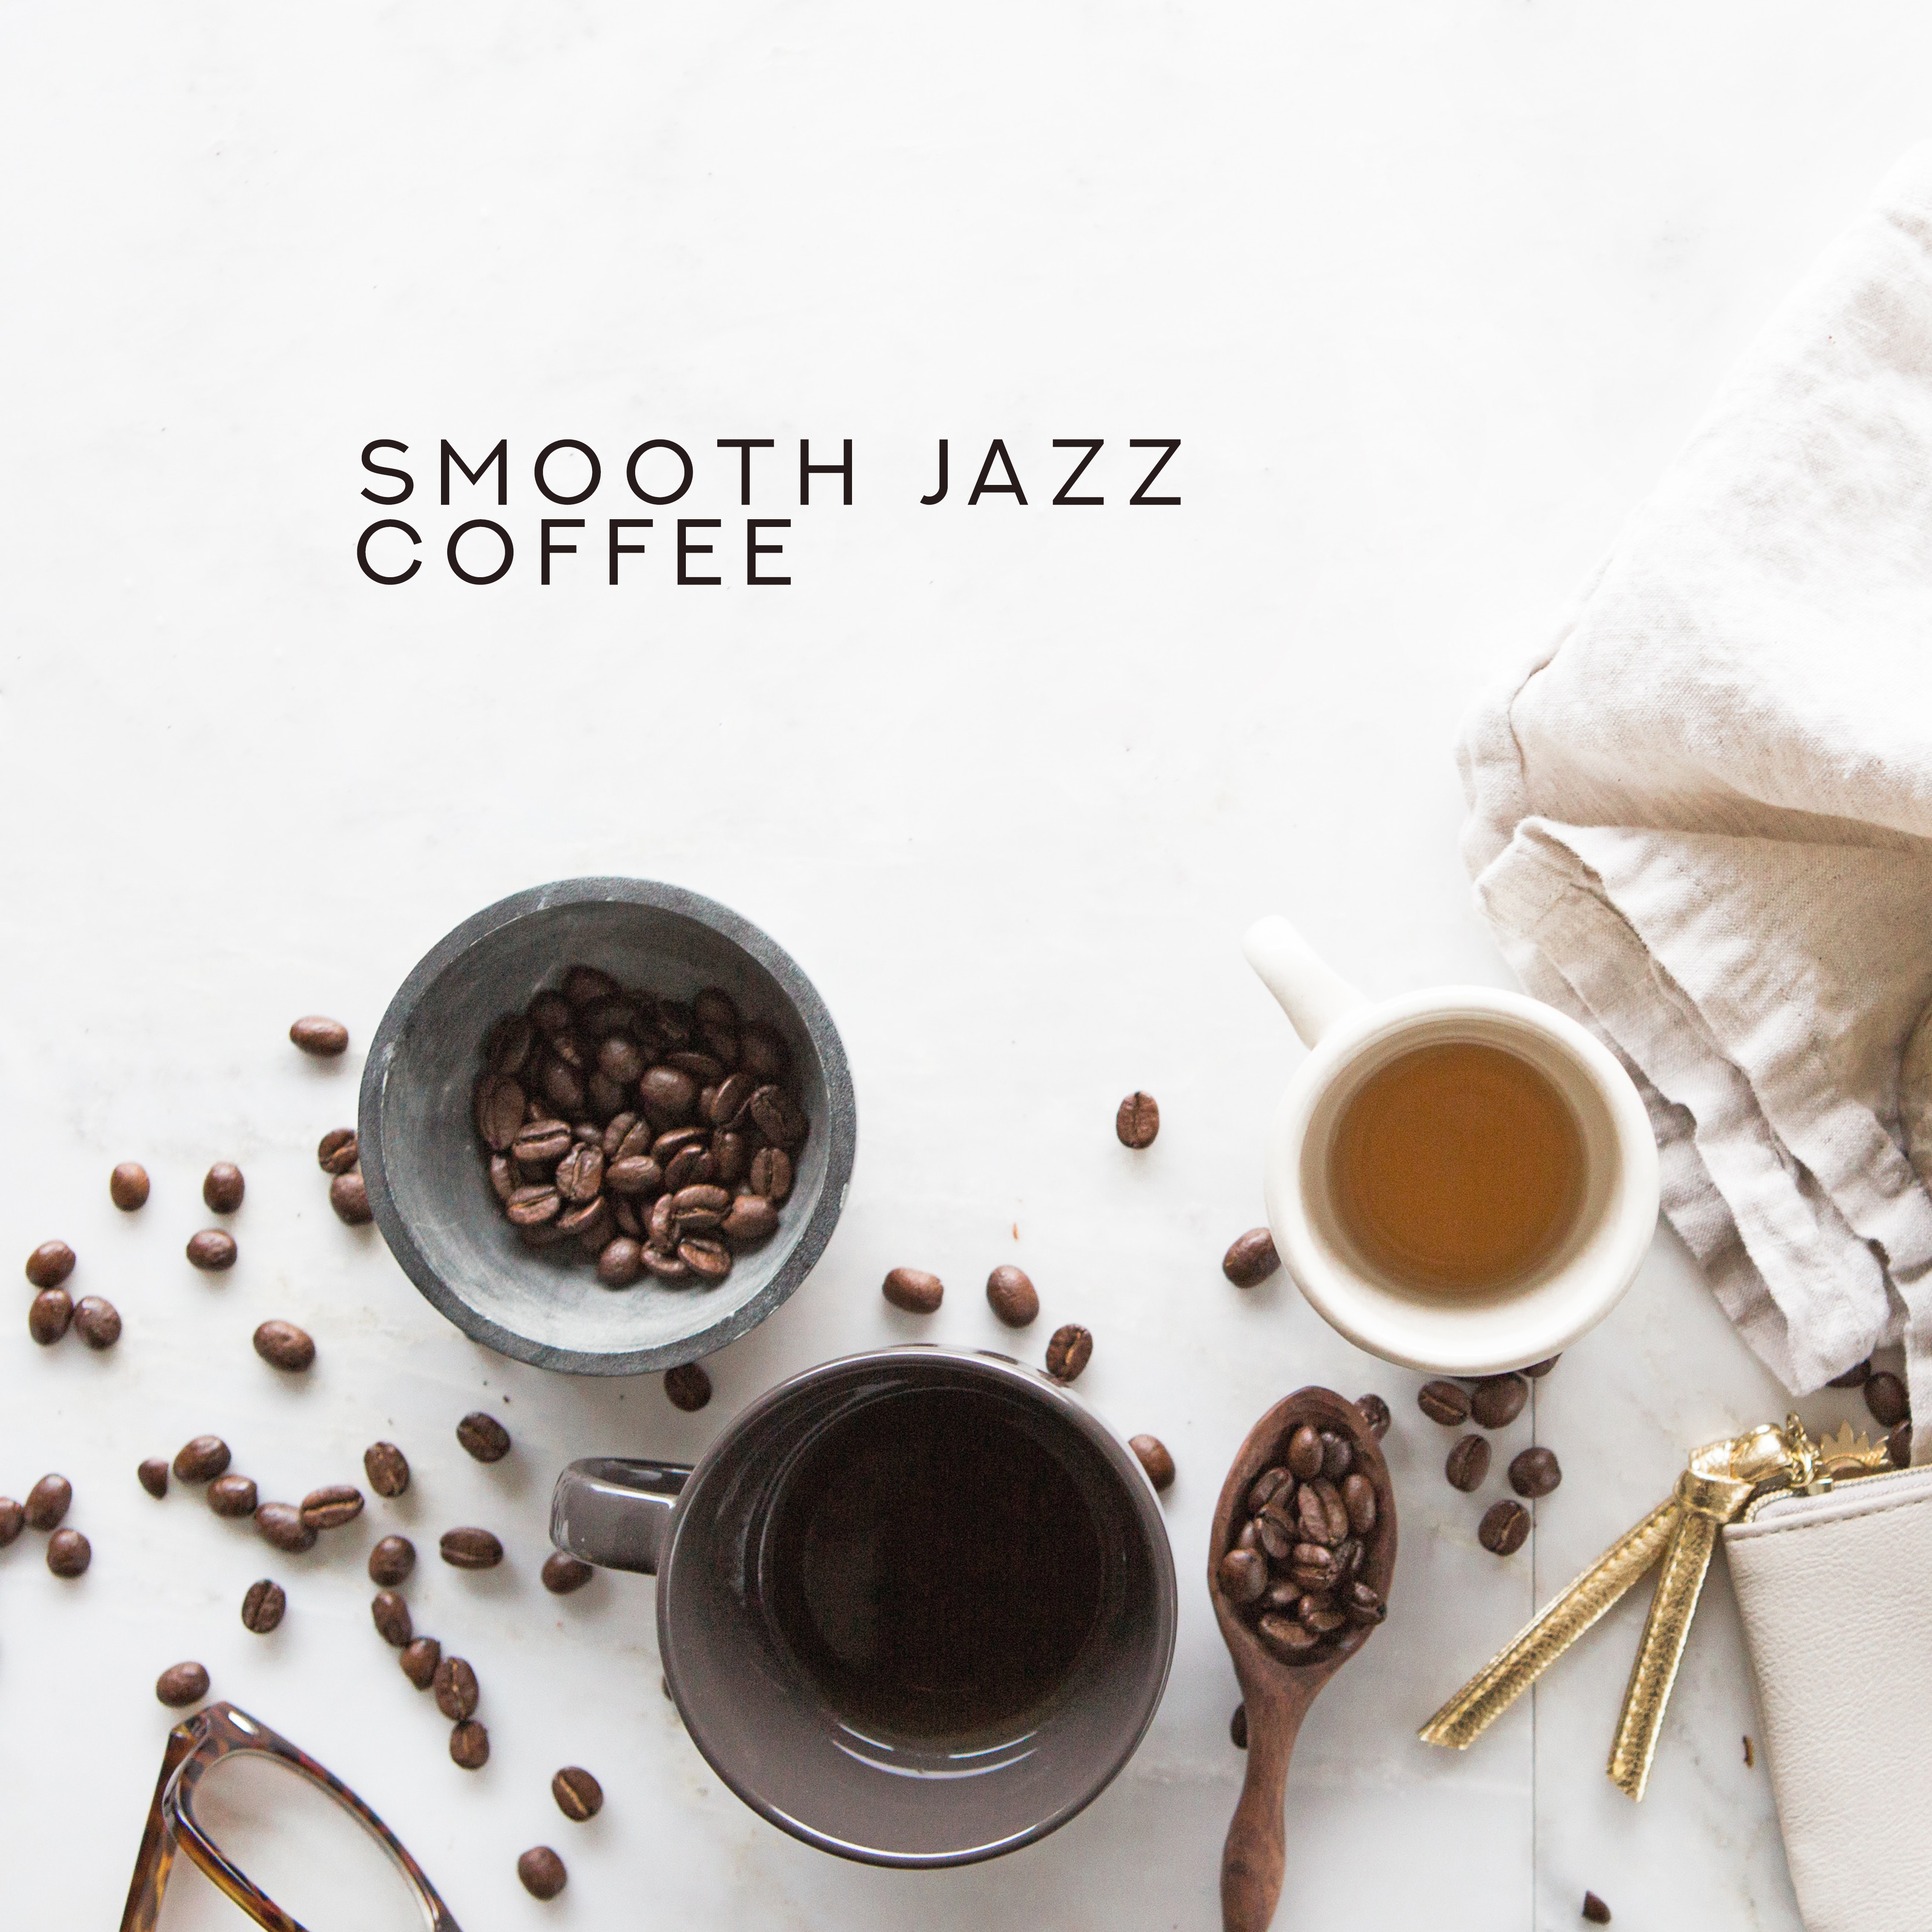 Smooth Jazz Coffee – Restaurant Music, Perfect Relax, Jazz Lounge, Dinner Songs, Instrumental Jazz Songs